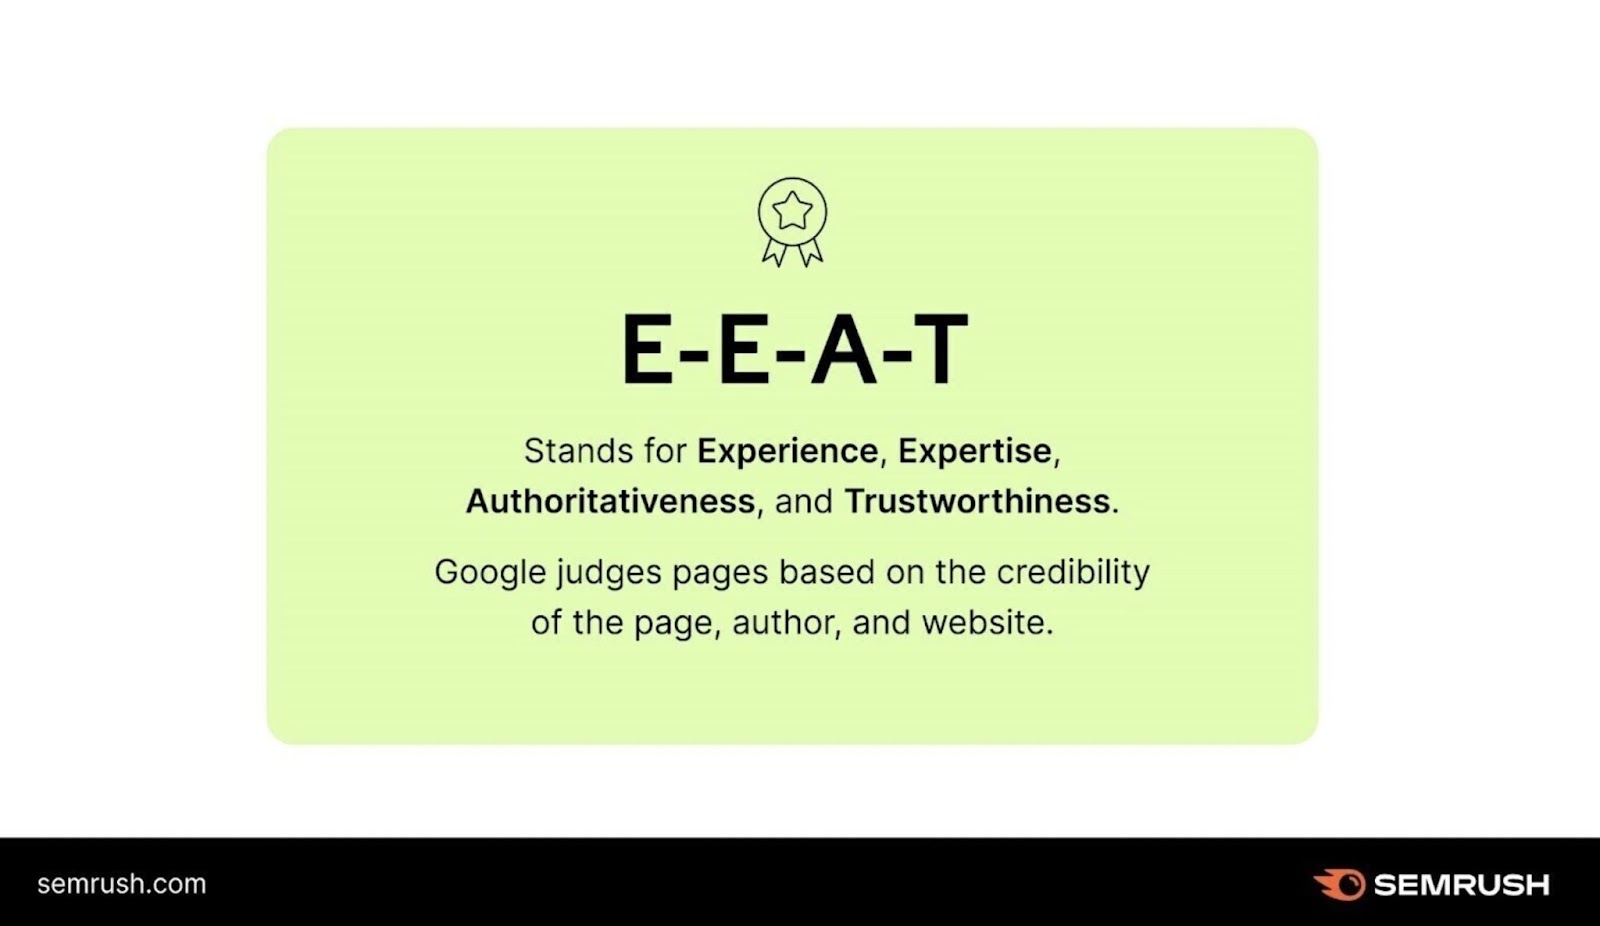 E-E-A-T stands for experience, expertise, authoritativeness, and trustworthiness